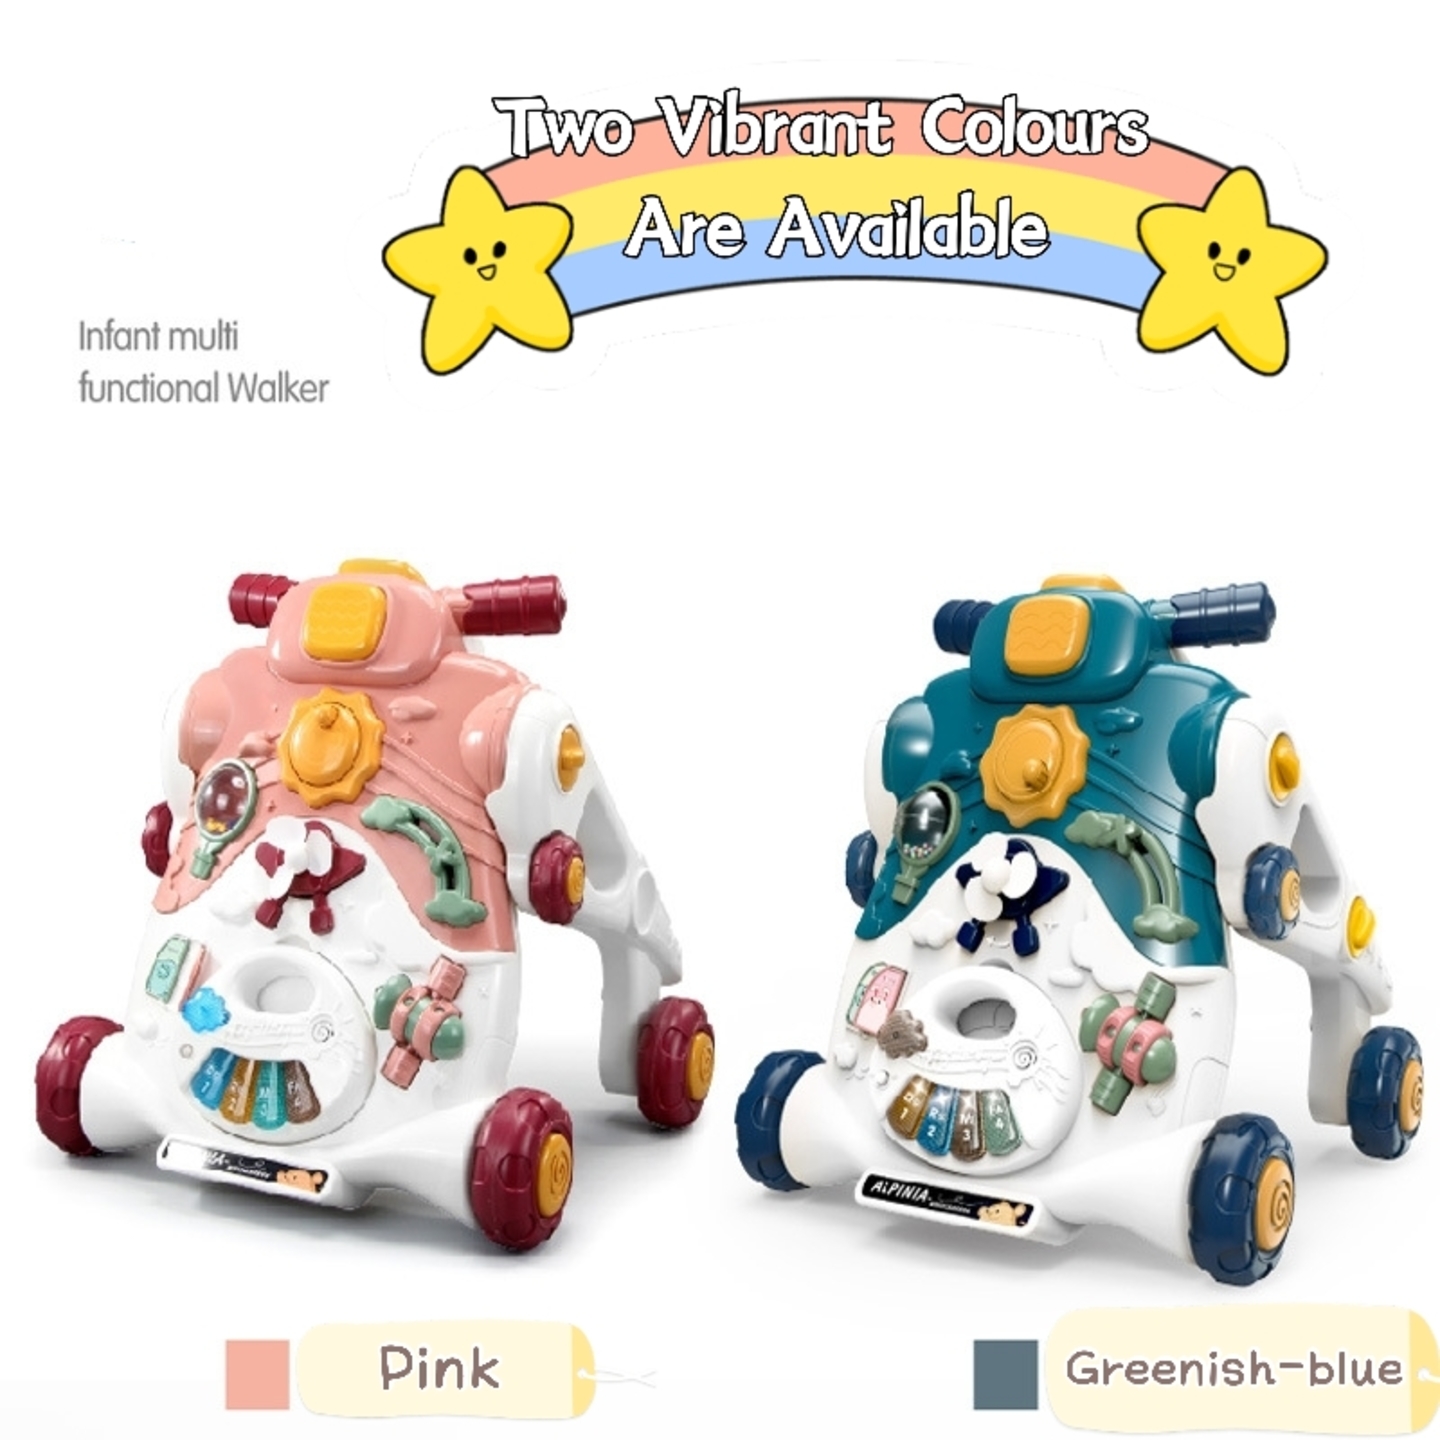 Children Multifunction Walker and Pedal-Free Tricycle with Educational Interactive Manipulatives and Musicical Sounds